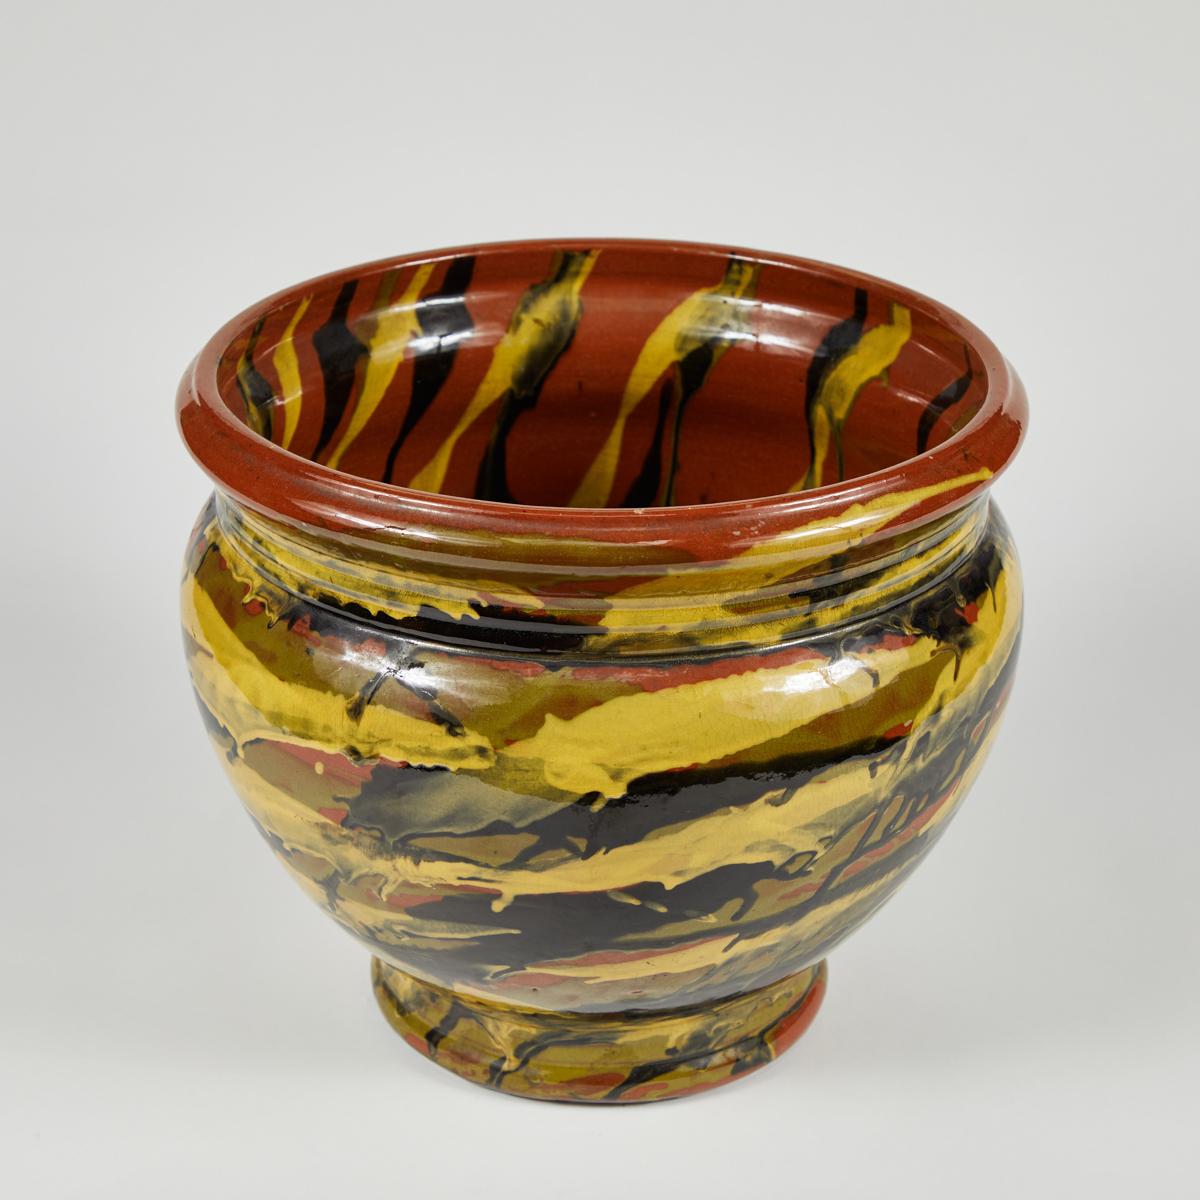 Peters and Reed glazed pottery vase or pot. Richly dimensional multi-colored glazing in shades of mustard, ink, moss, and terracotta give the piece a sense of movement. Because the glaze has been applied in an energetic and abstract pattern, it